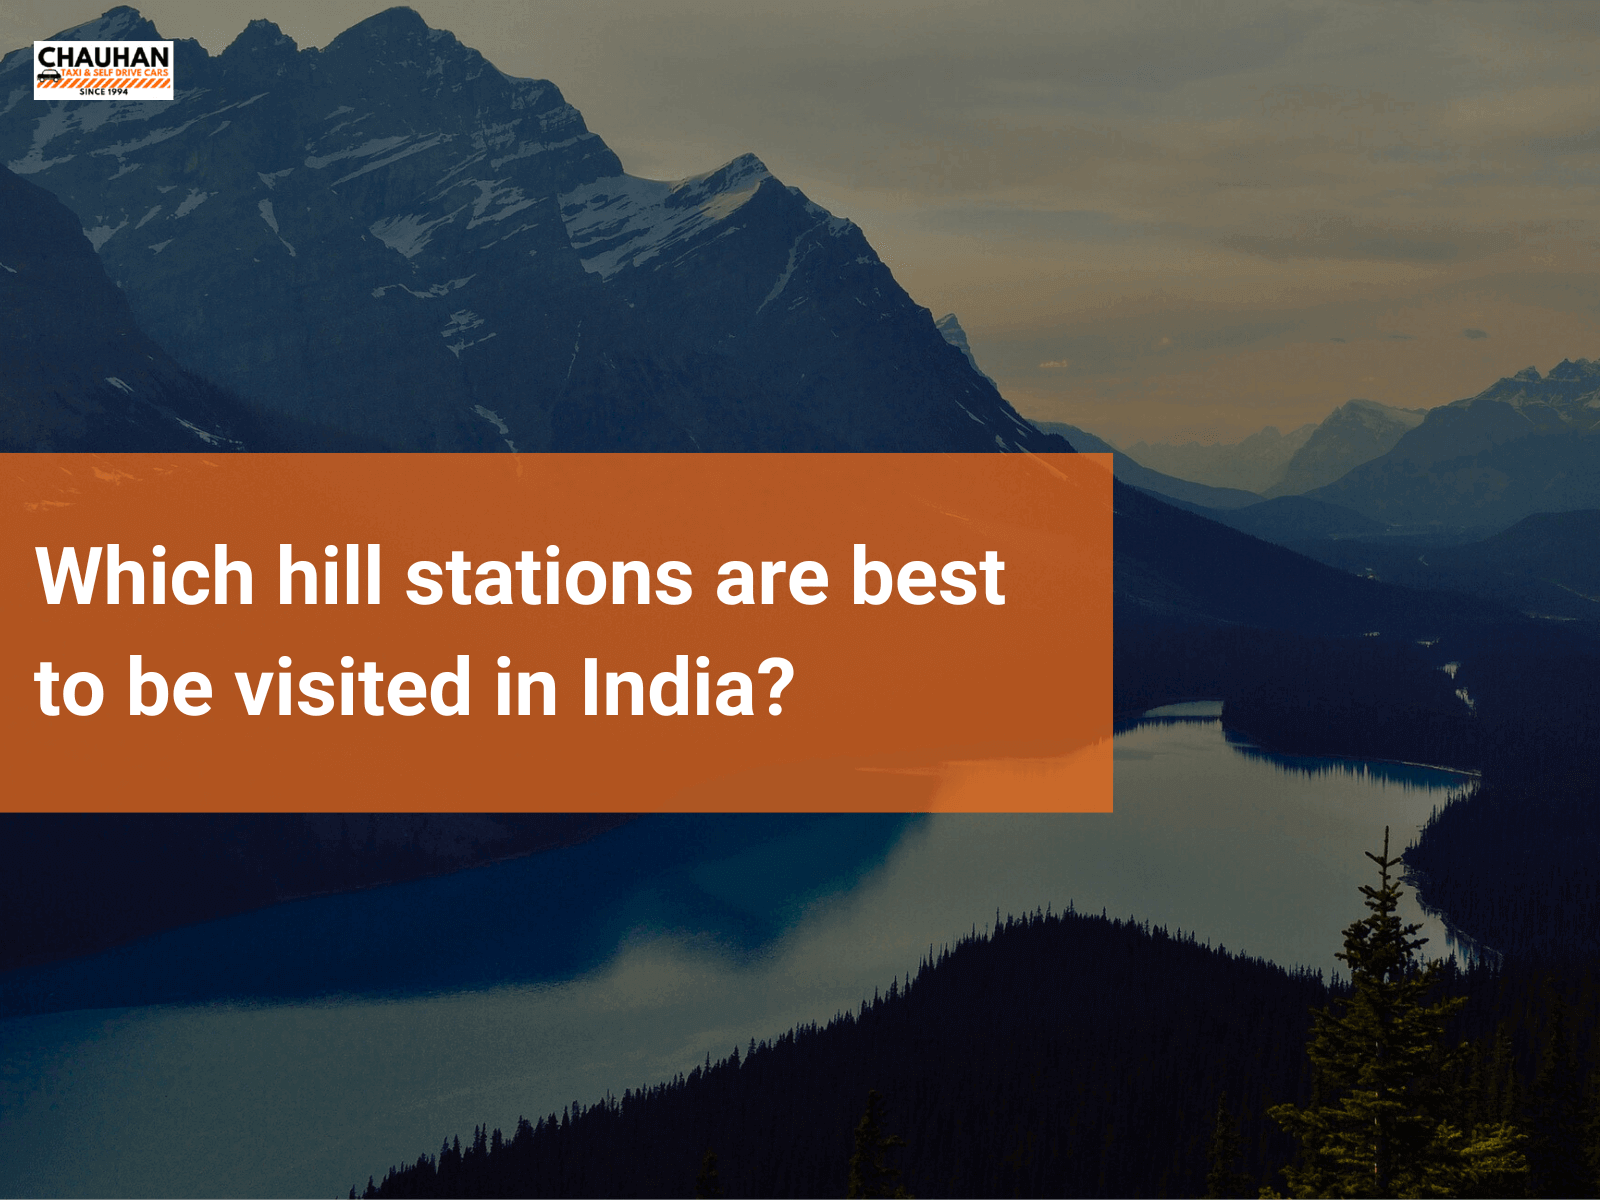 Which hill stations are best to be visited in India?